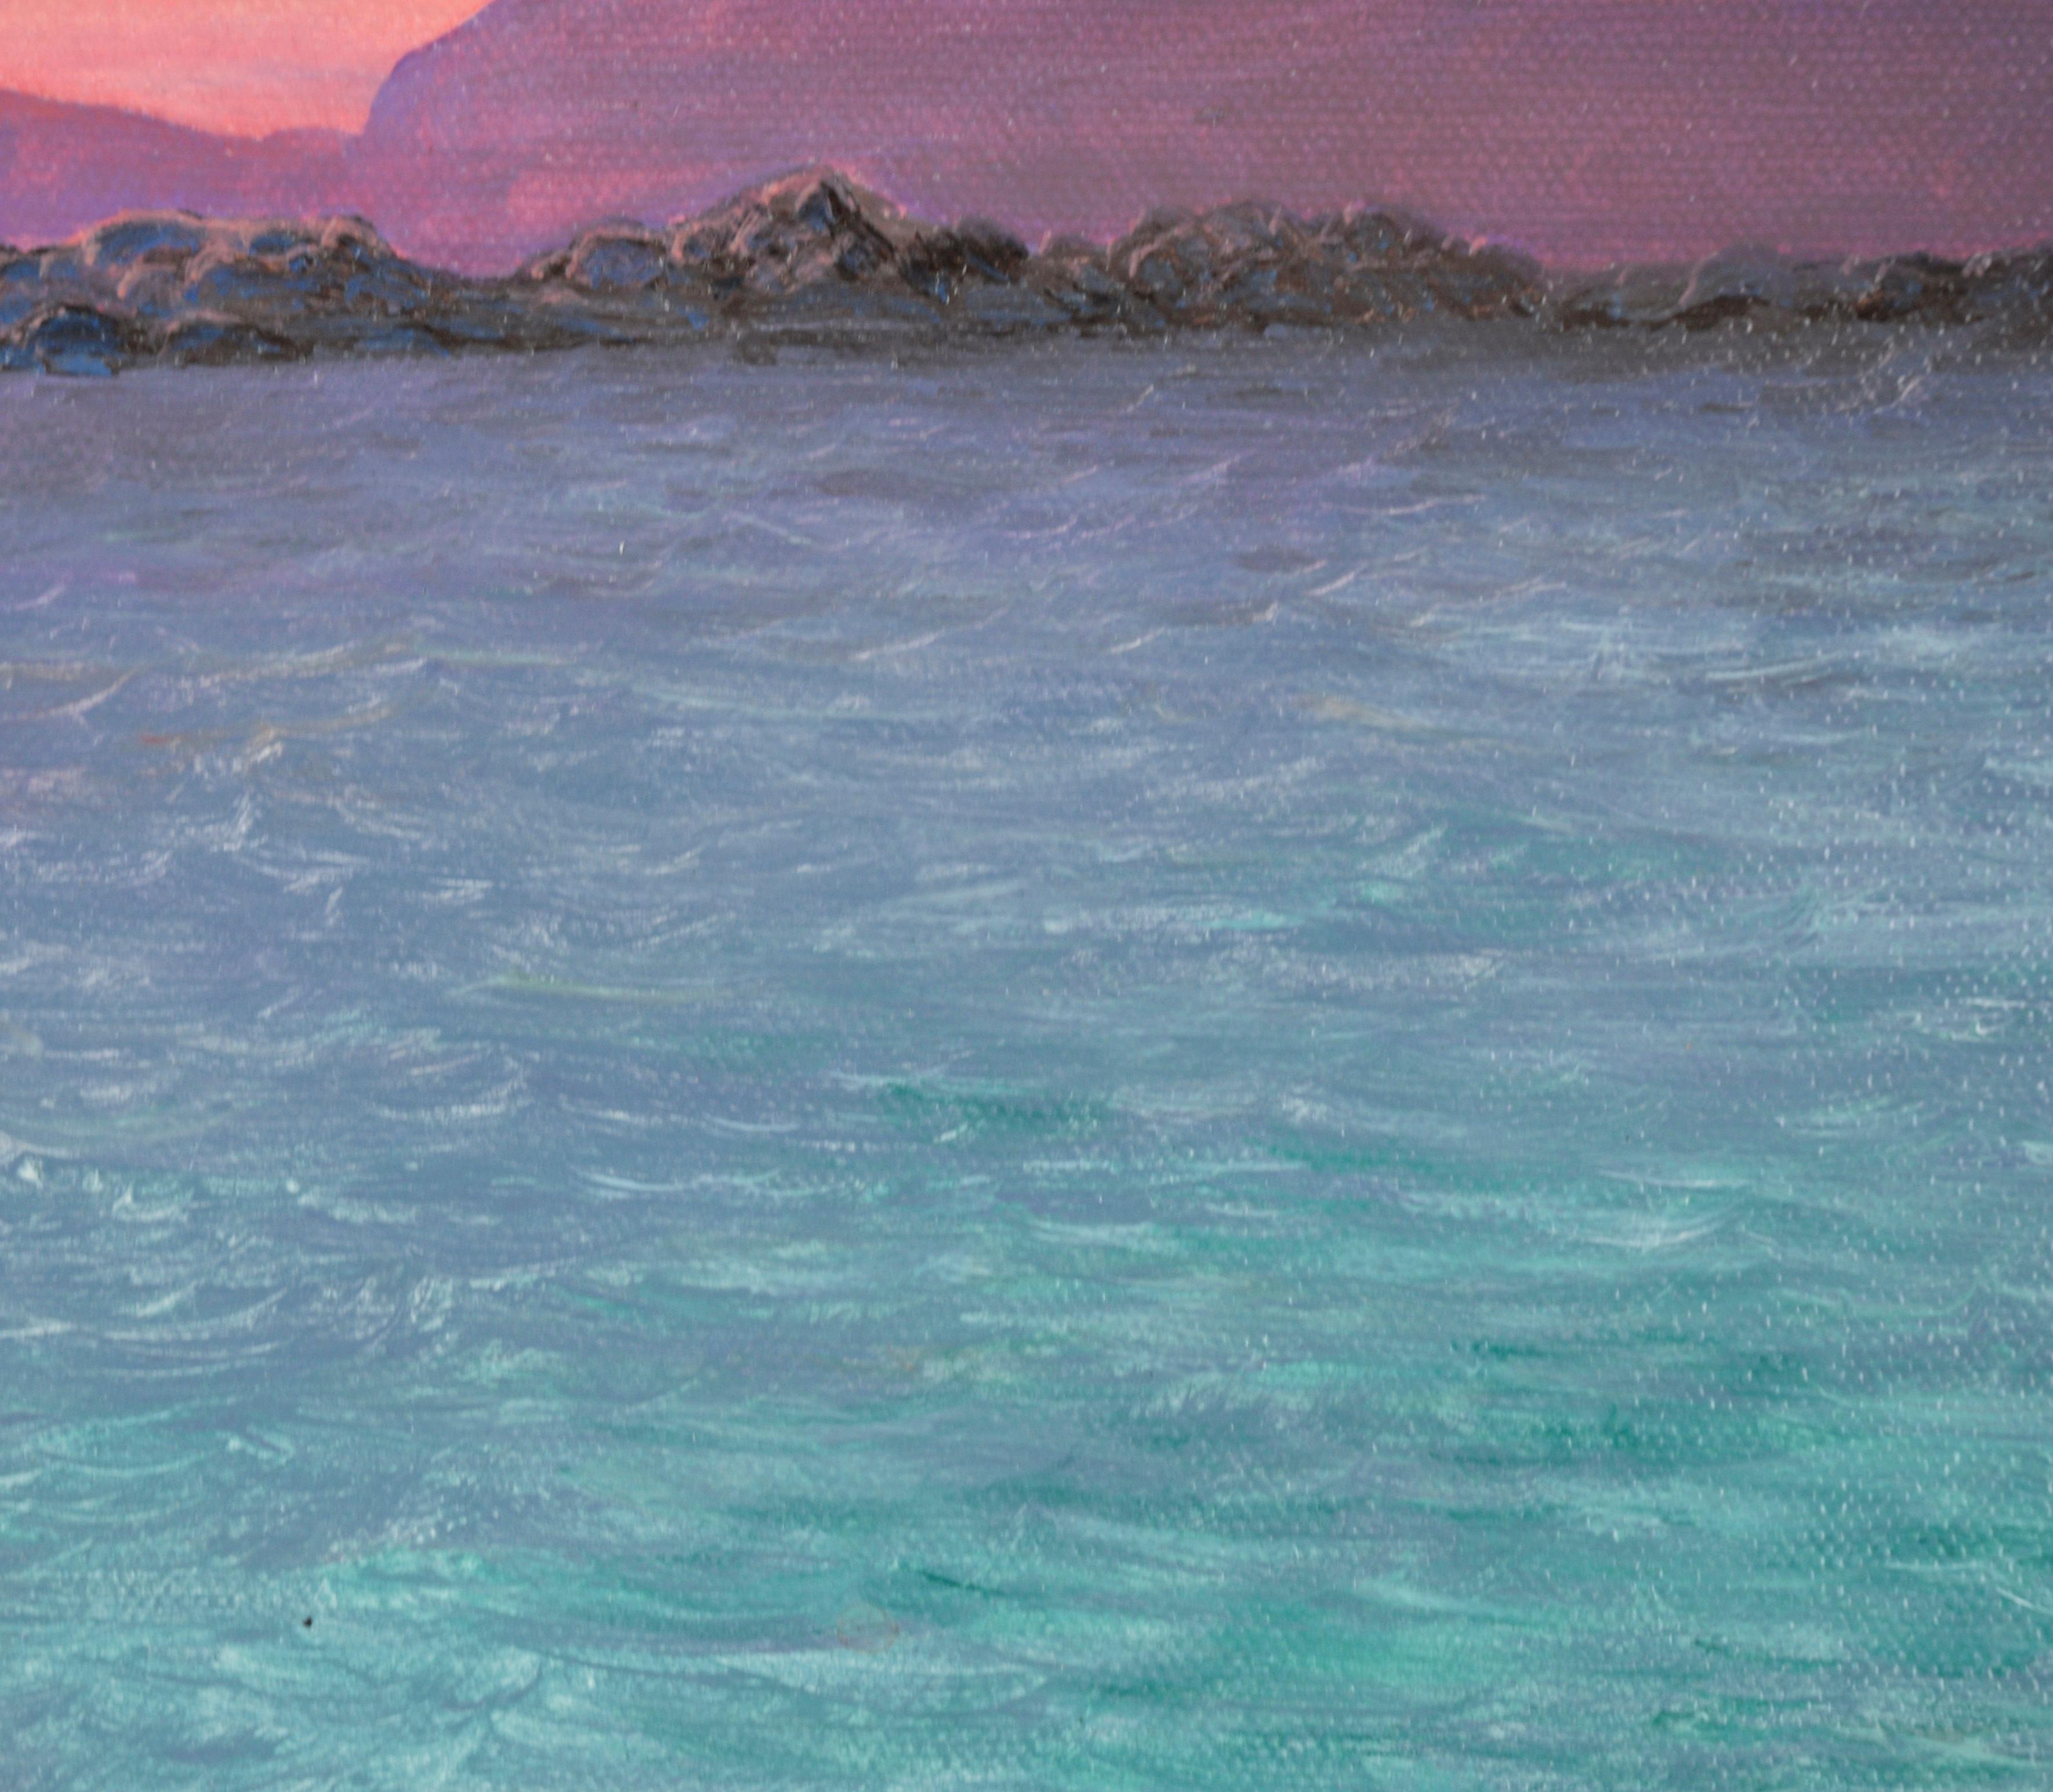 Beautiful California seascape with bright sunset by Roger Budney (American, b. 1945). The glowing sun is just about to dip below the horizon, surrounded by purple skies and mountains. Reflections of the sun dance on the water, drawing the viewer's